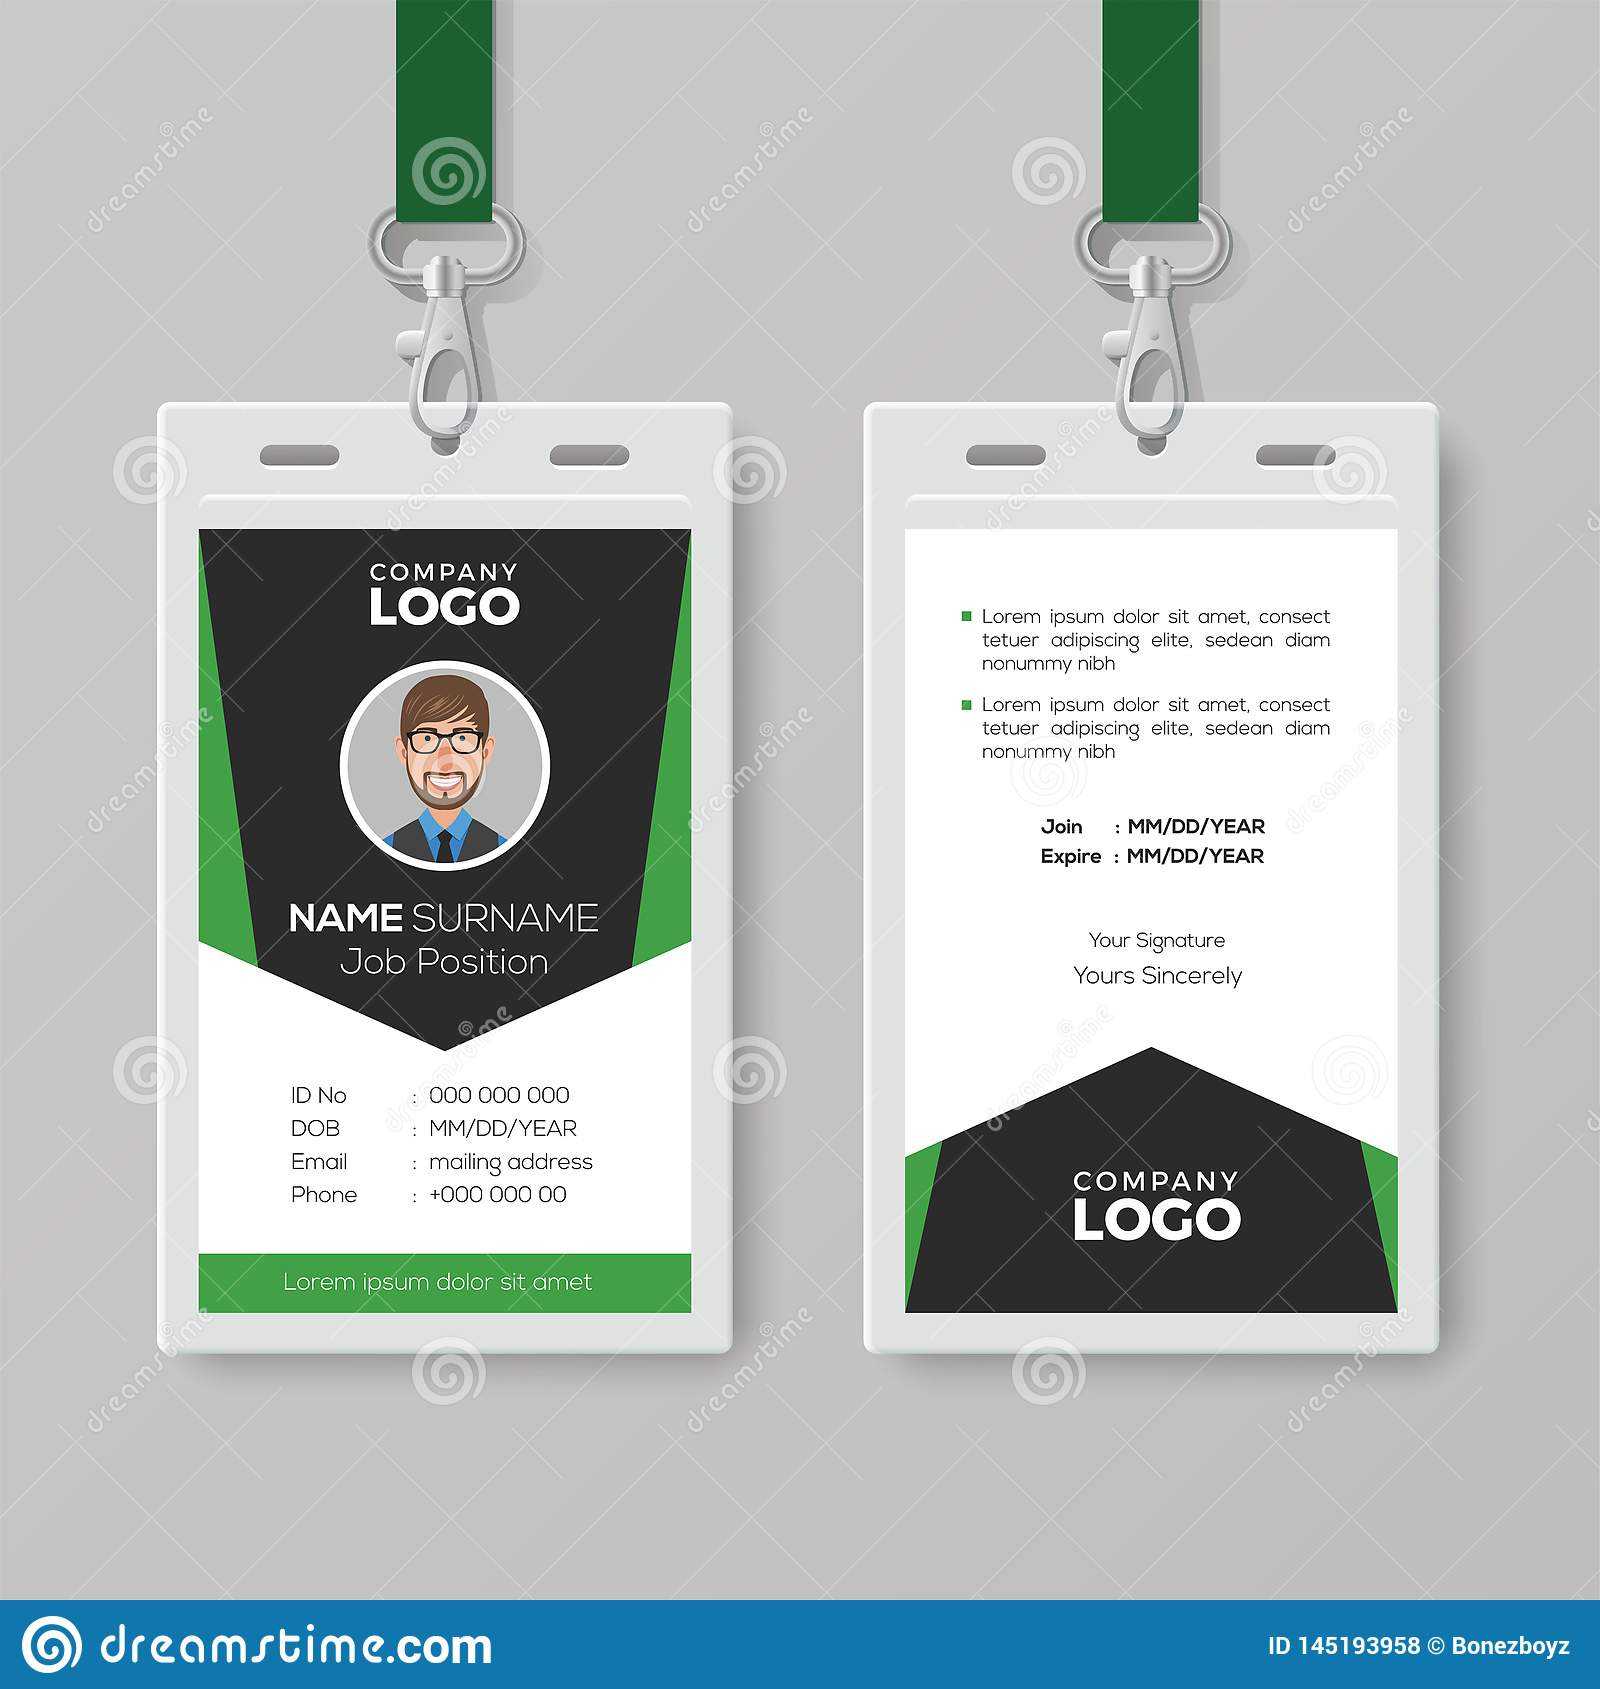 Creative Corporate Id Card Template With Green Details Stock For Work Id Card Template